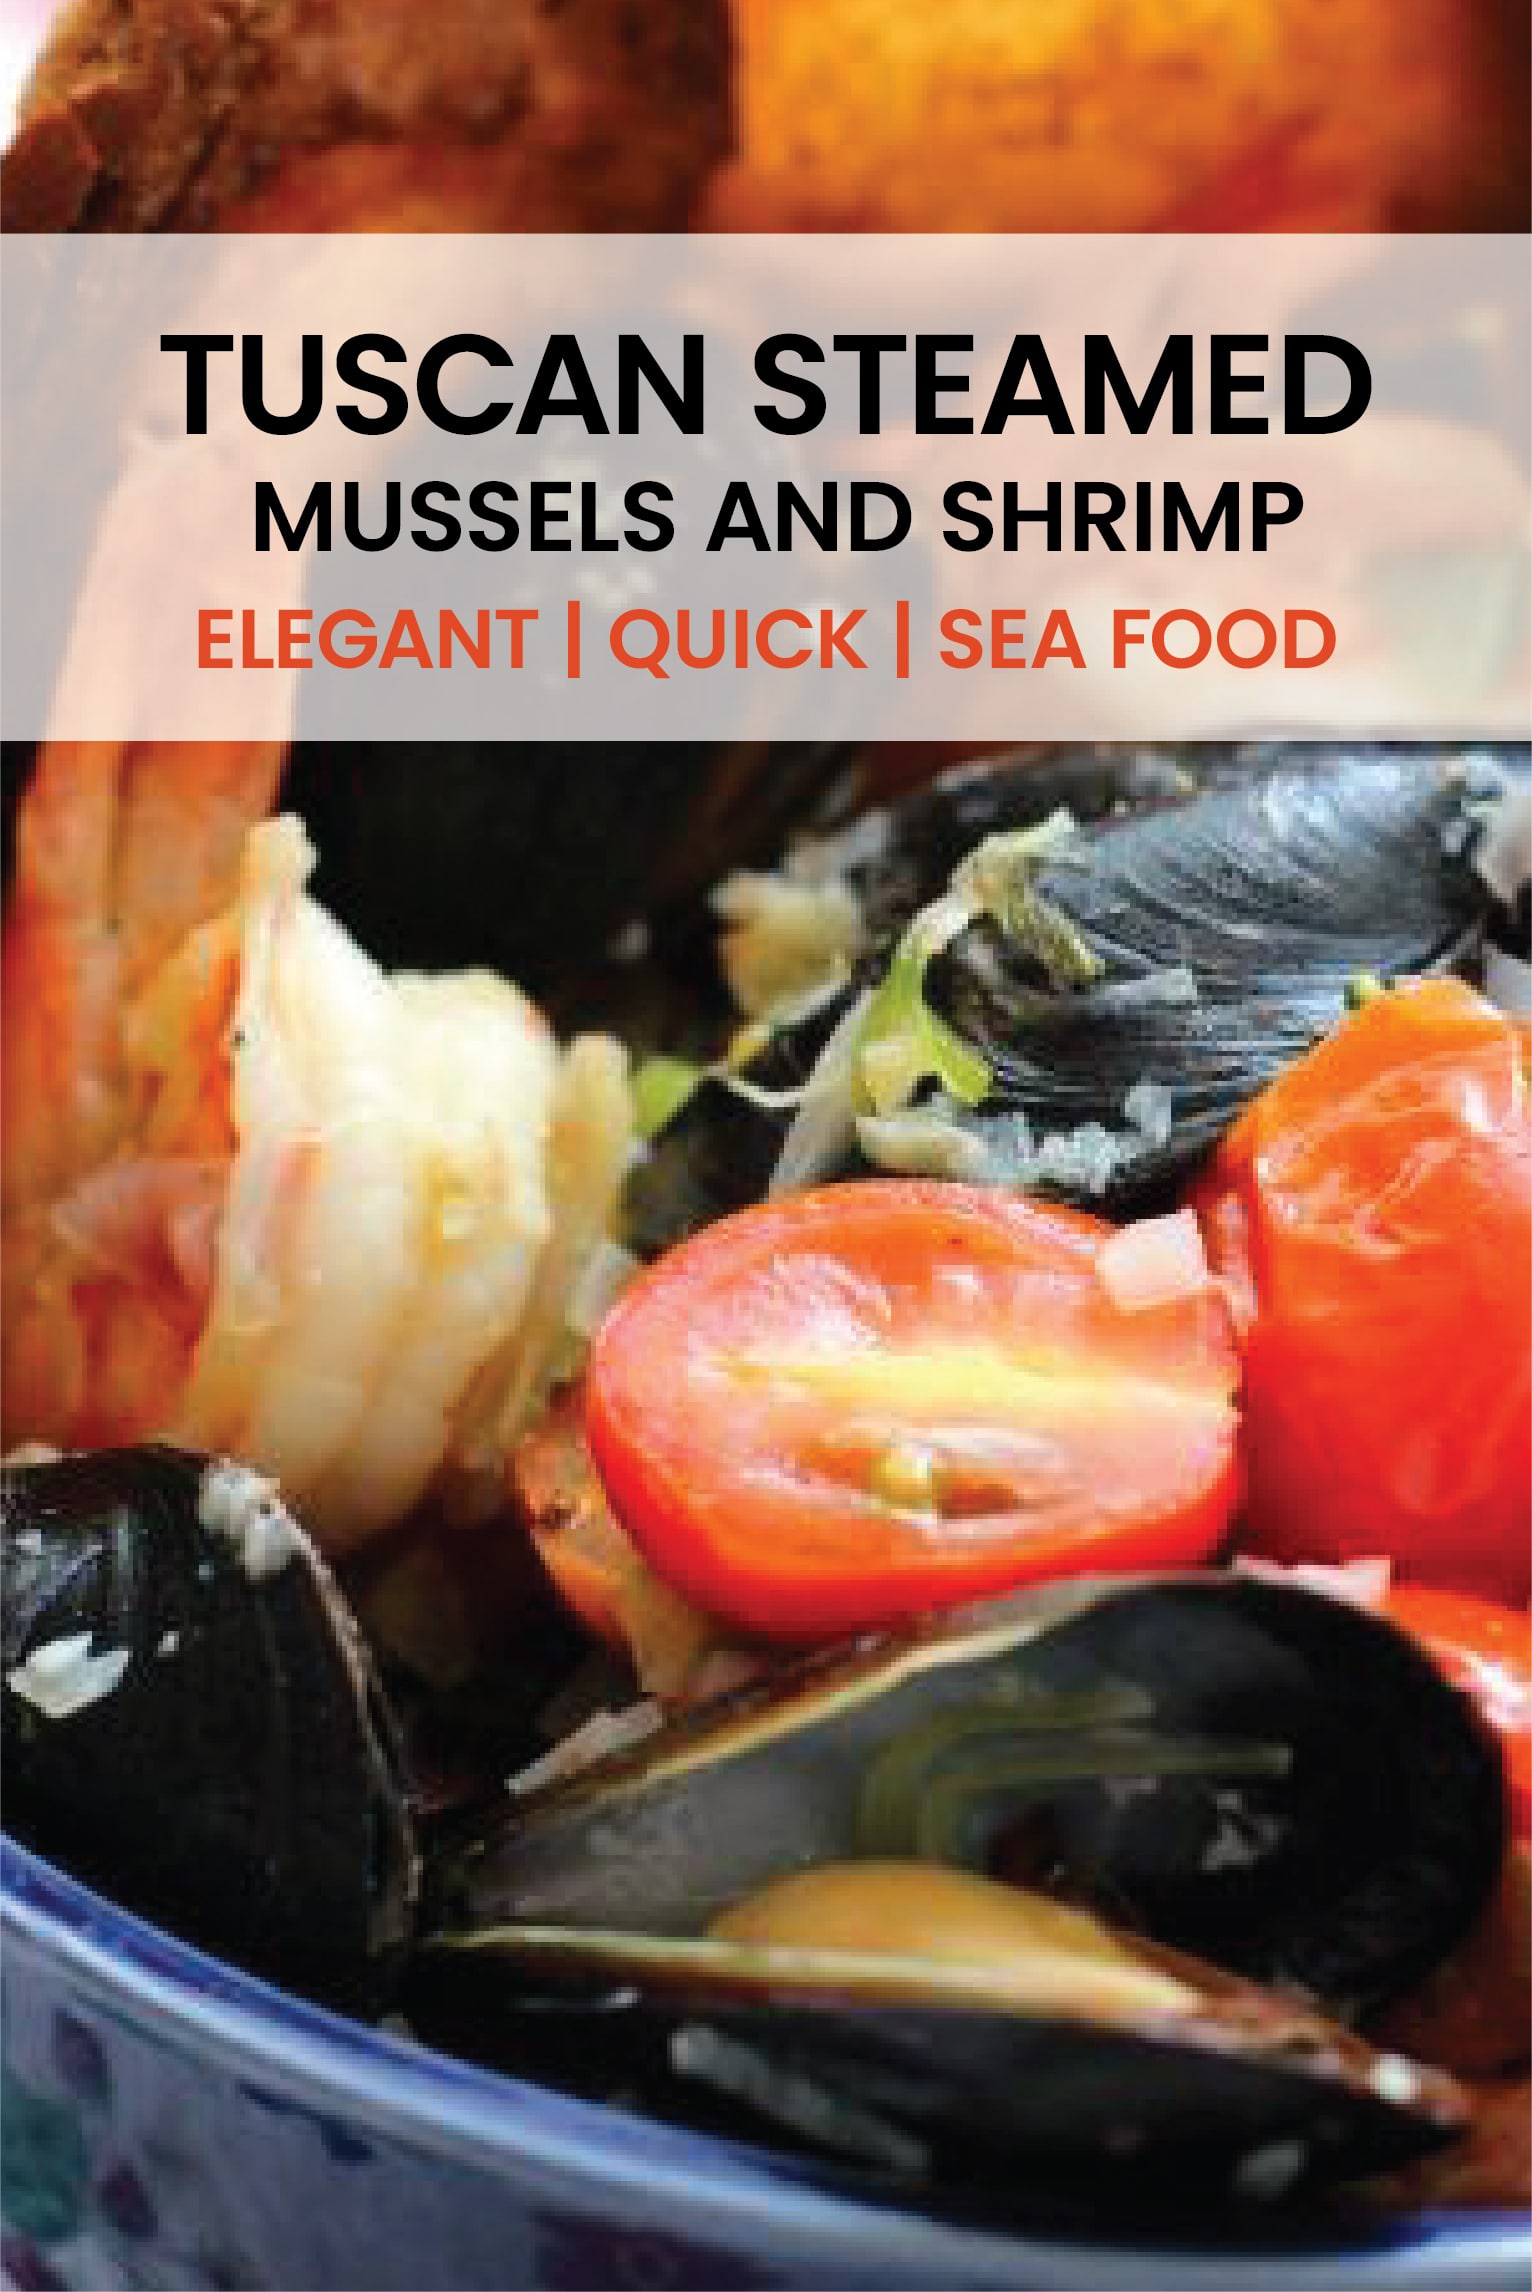 An elegant dinner that is made in less than 10 minutes has never tasted this good! #tuscan # #mussels #sogood